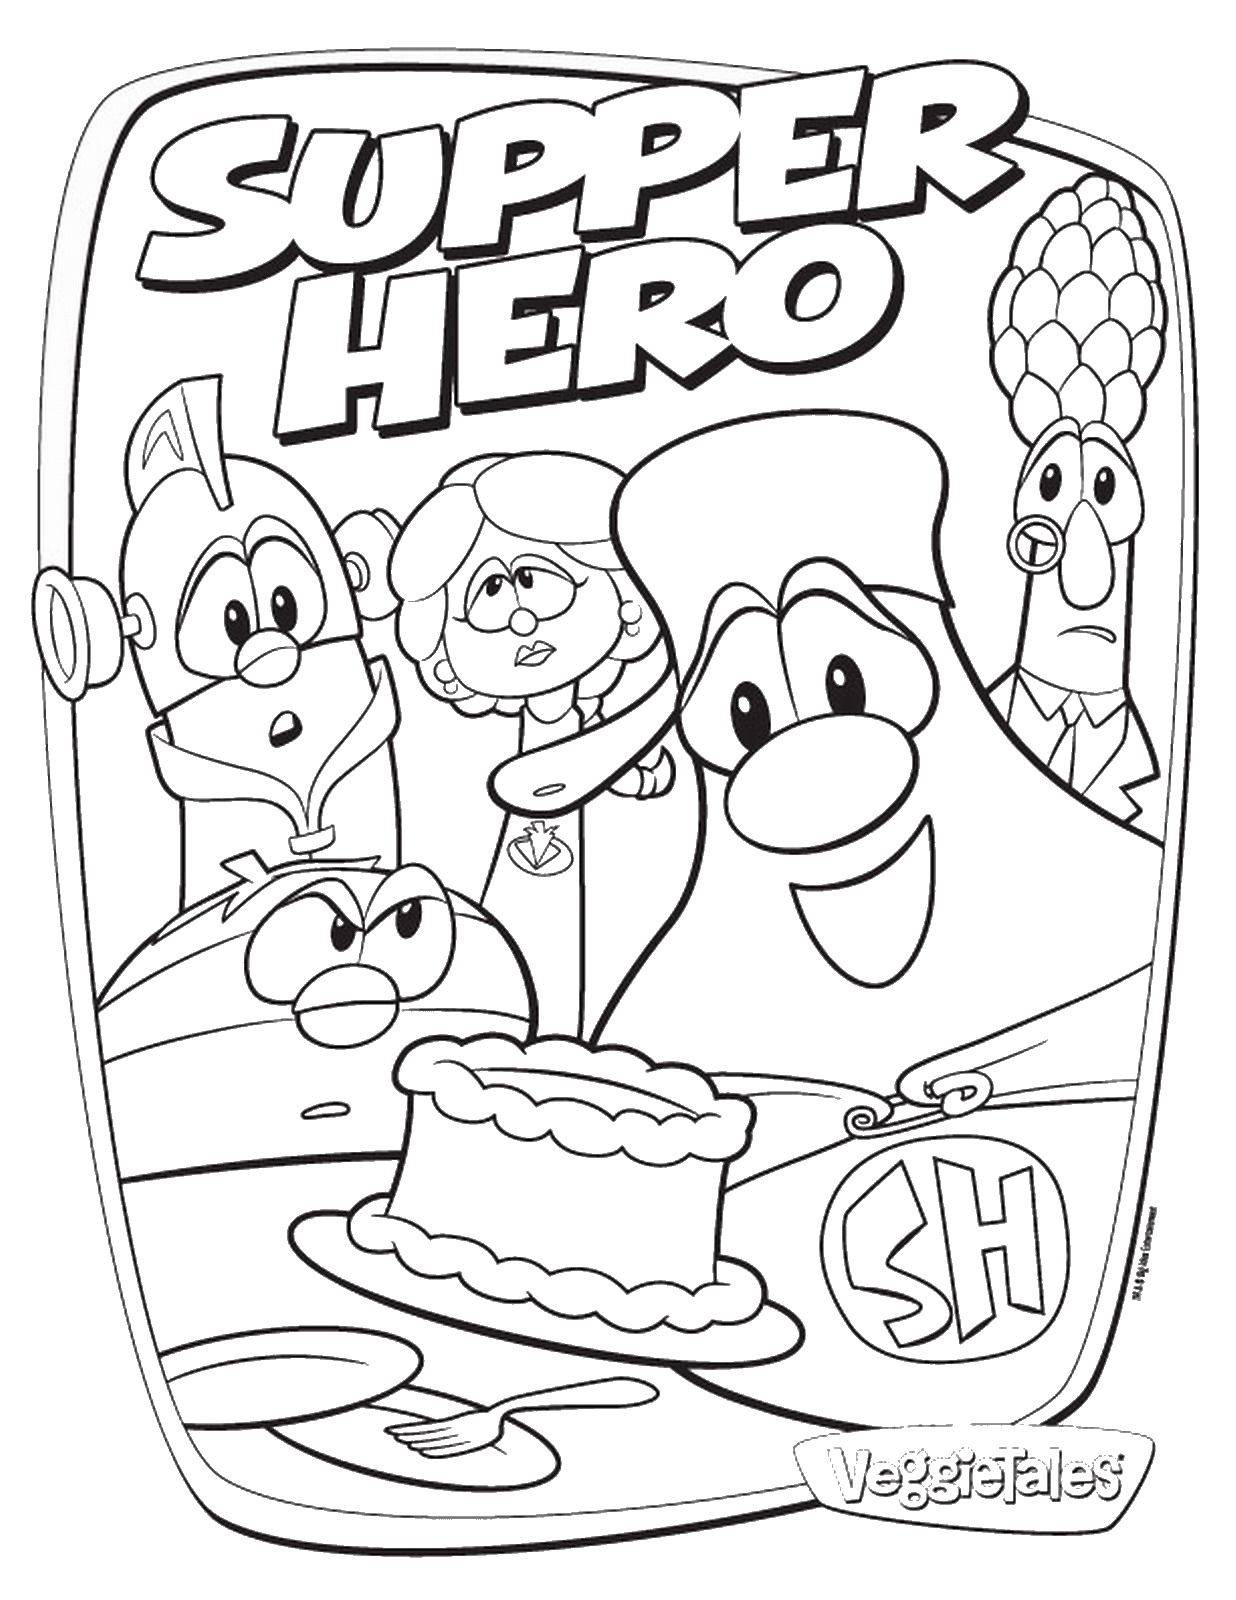 Download Veggie Tales Coloring Pages King George And The Ducky ...